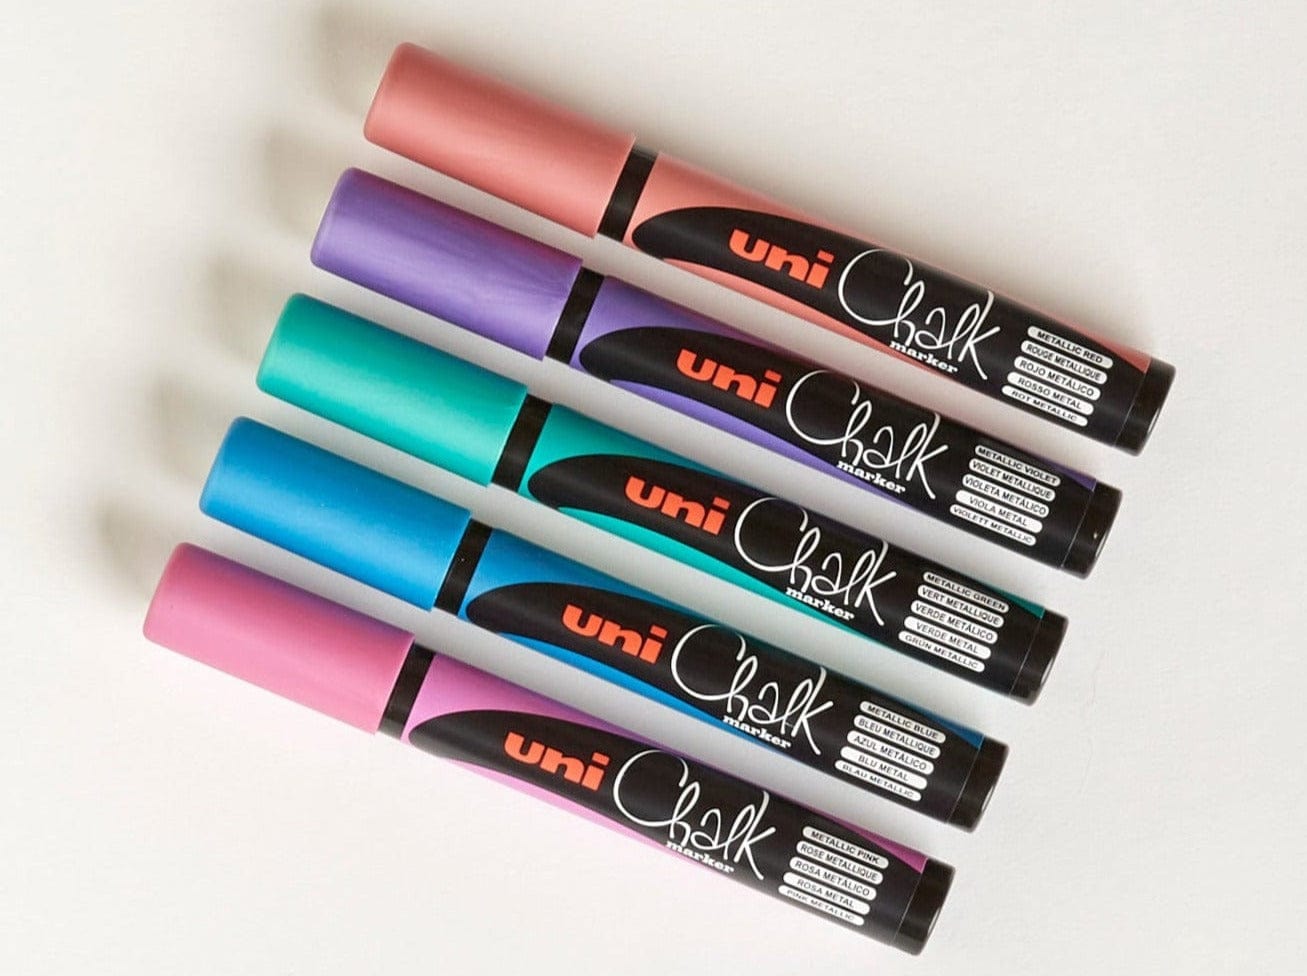 Liquid Chalk markers - 5 pack - Daily Orders